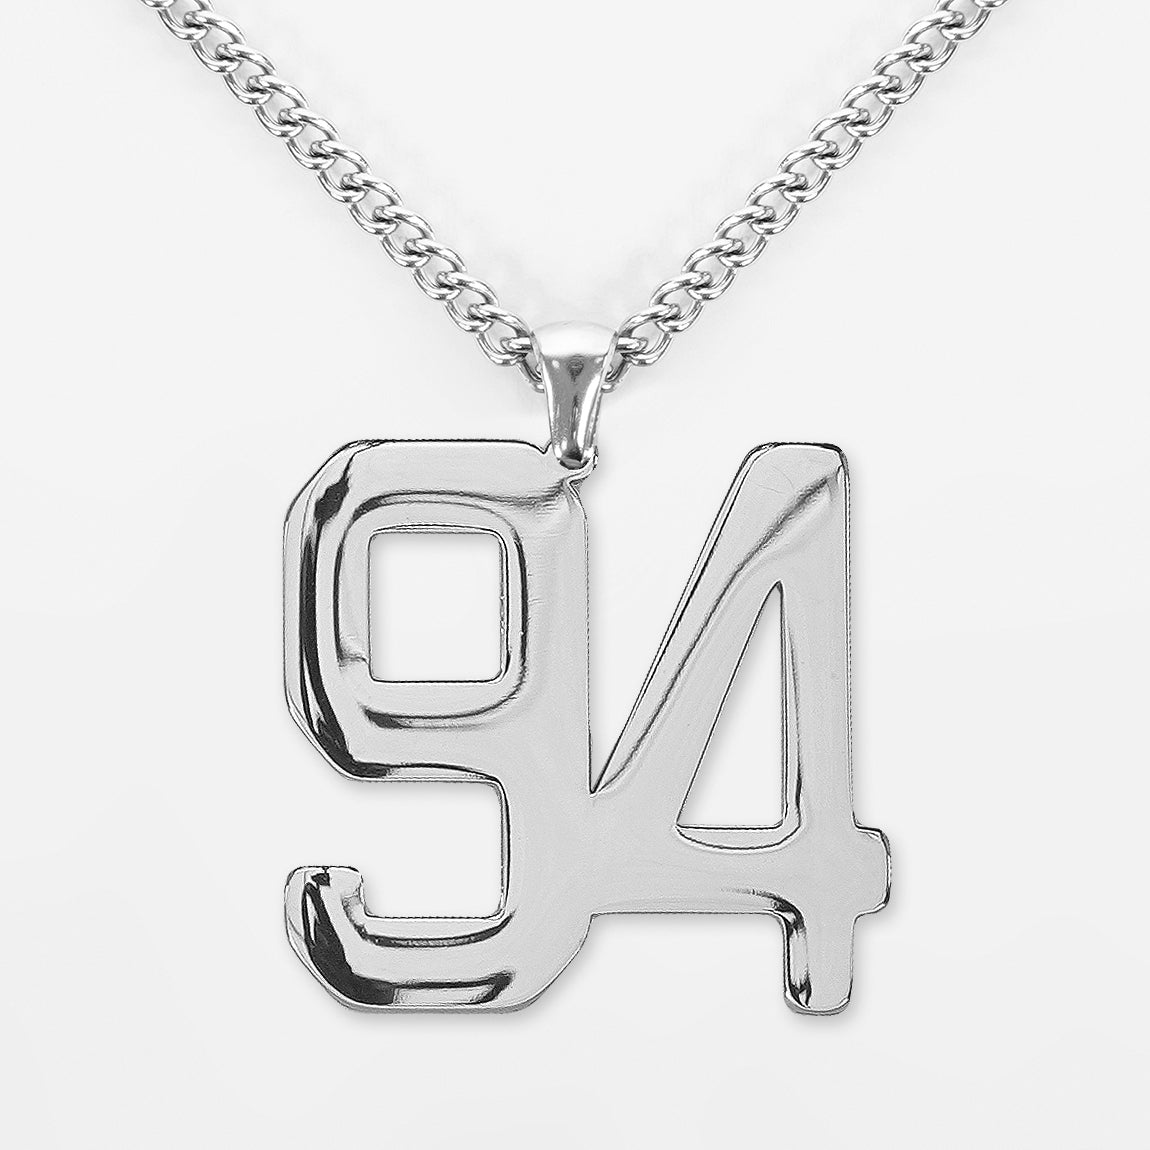 94 Number Pendant with Chain Necklace - Stainless Steel